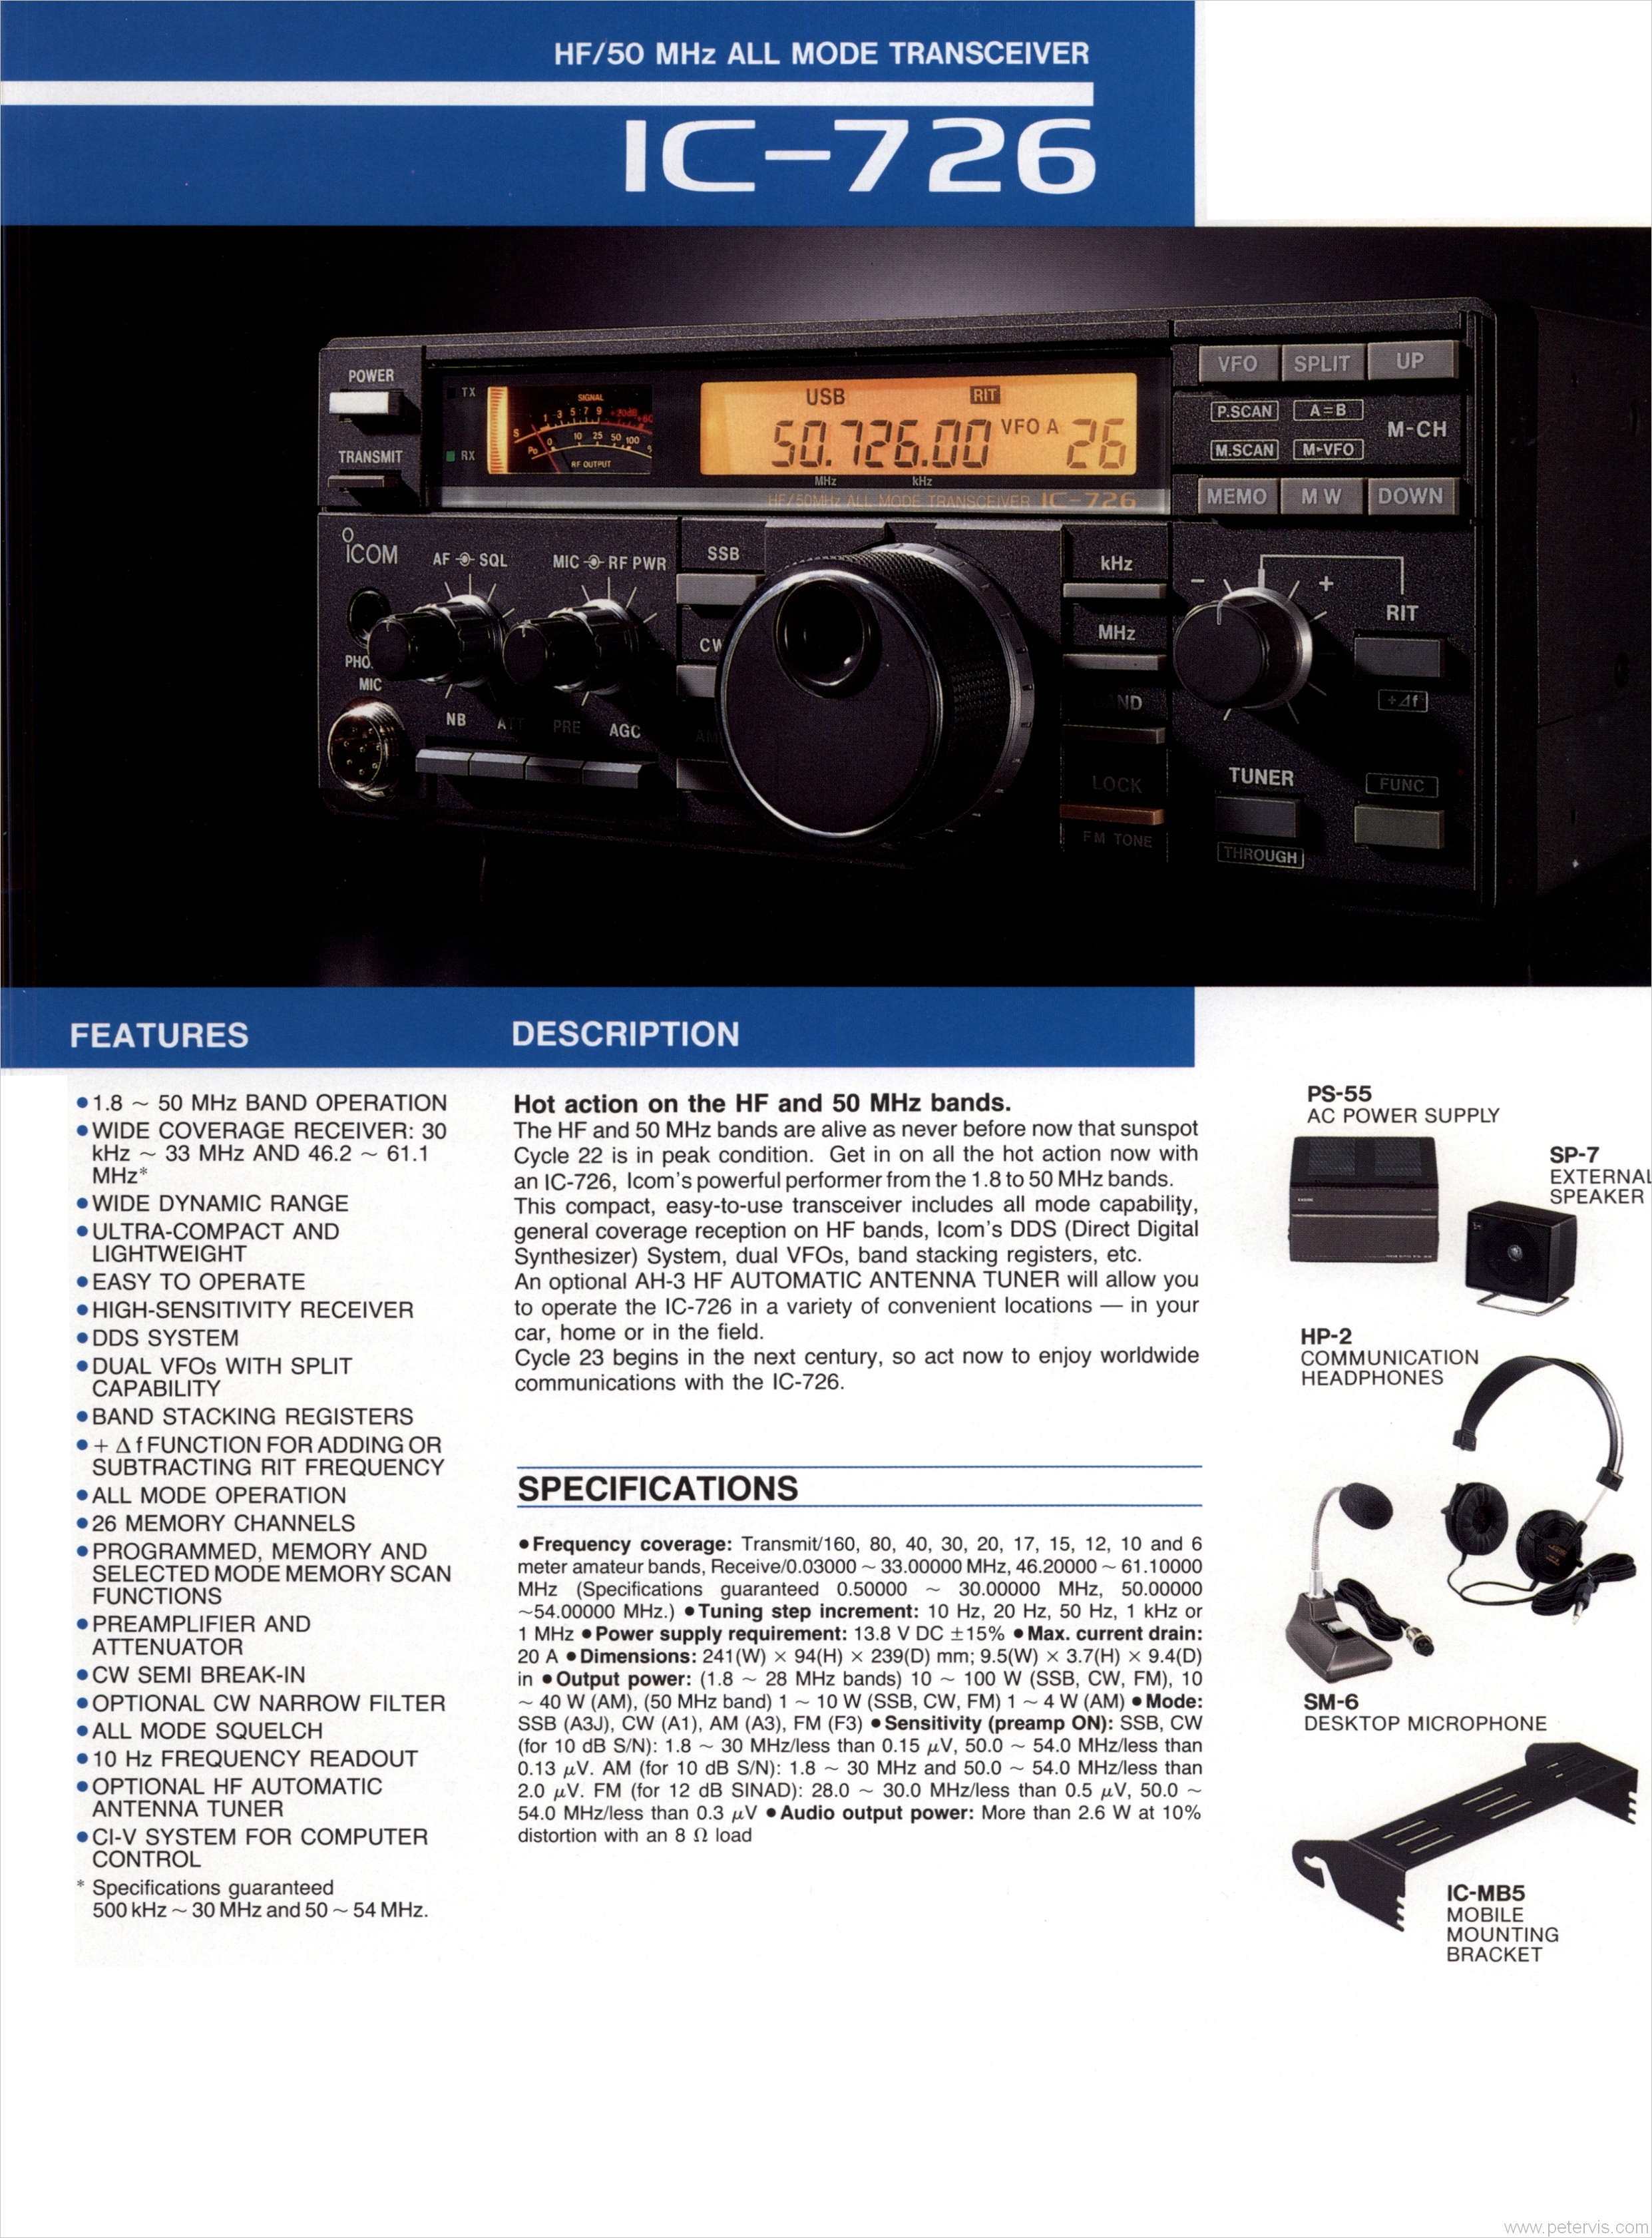 IC-726 SPECIFICATION and FEATURES